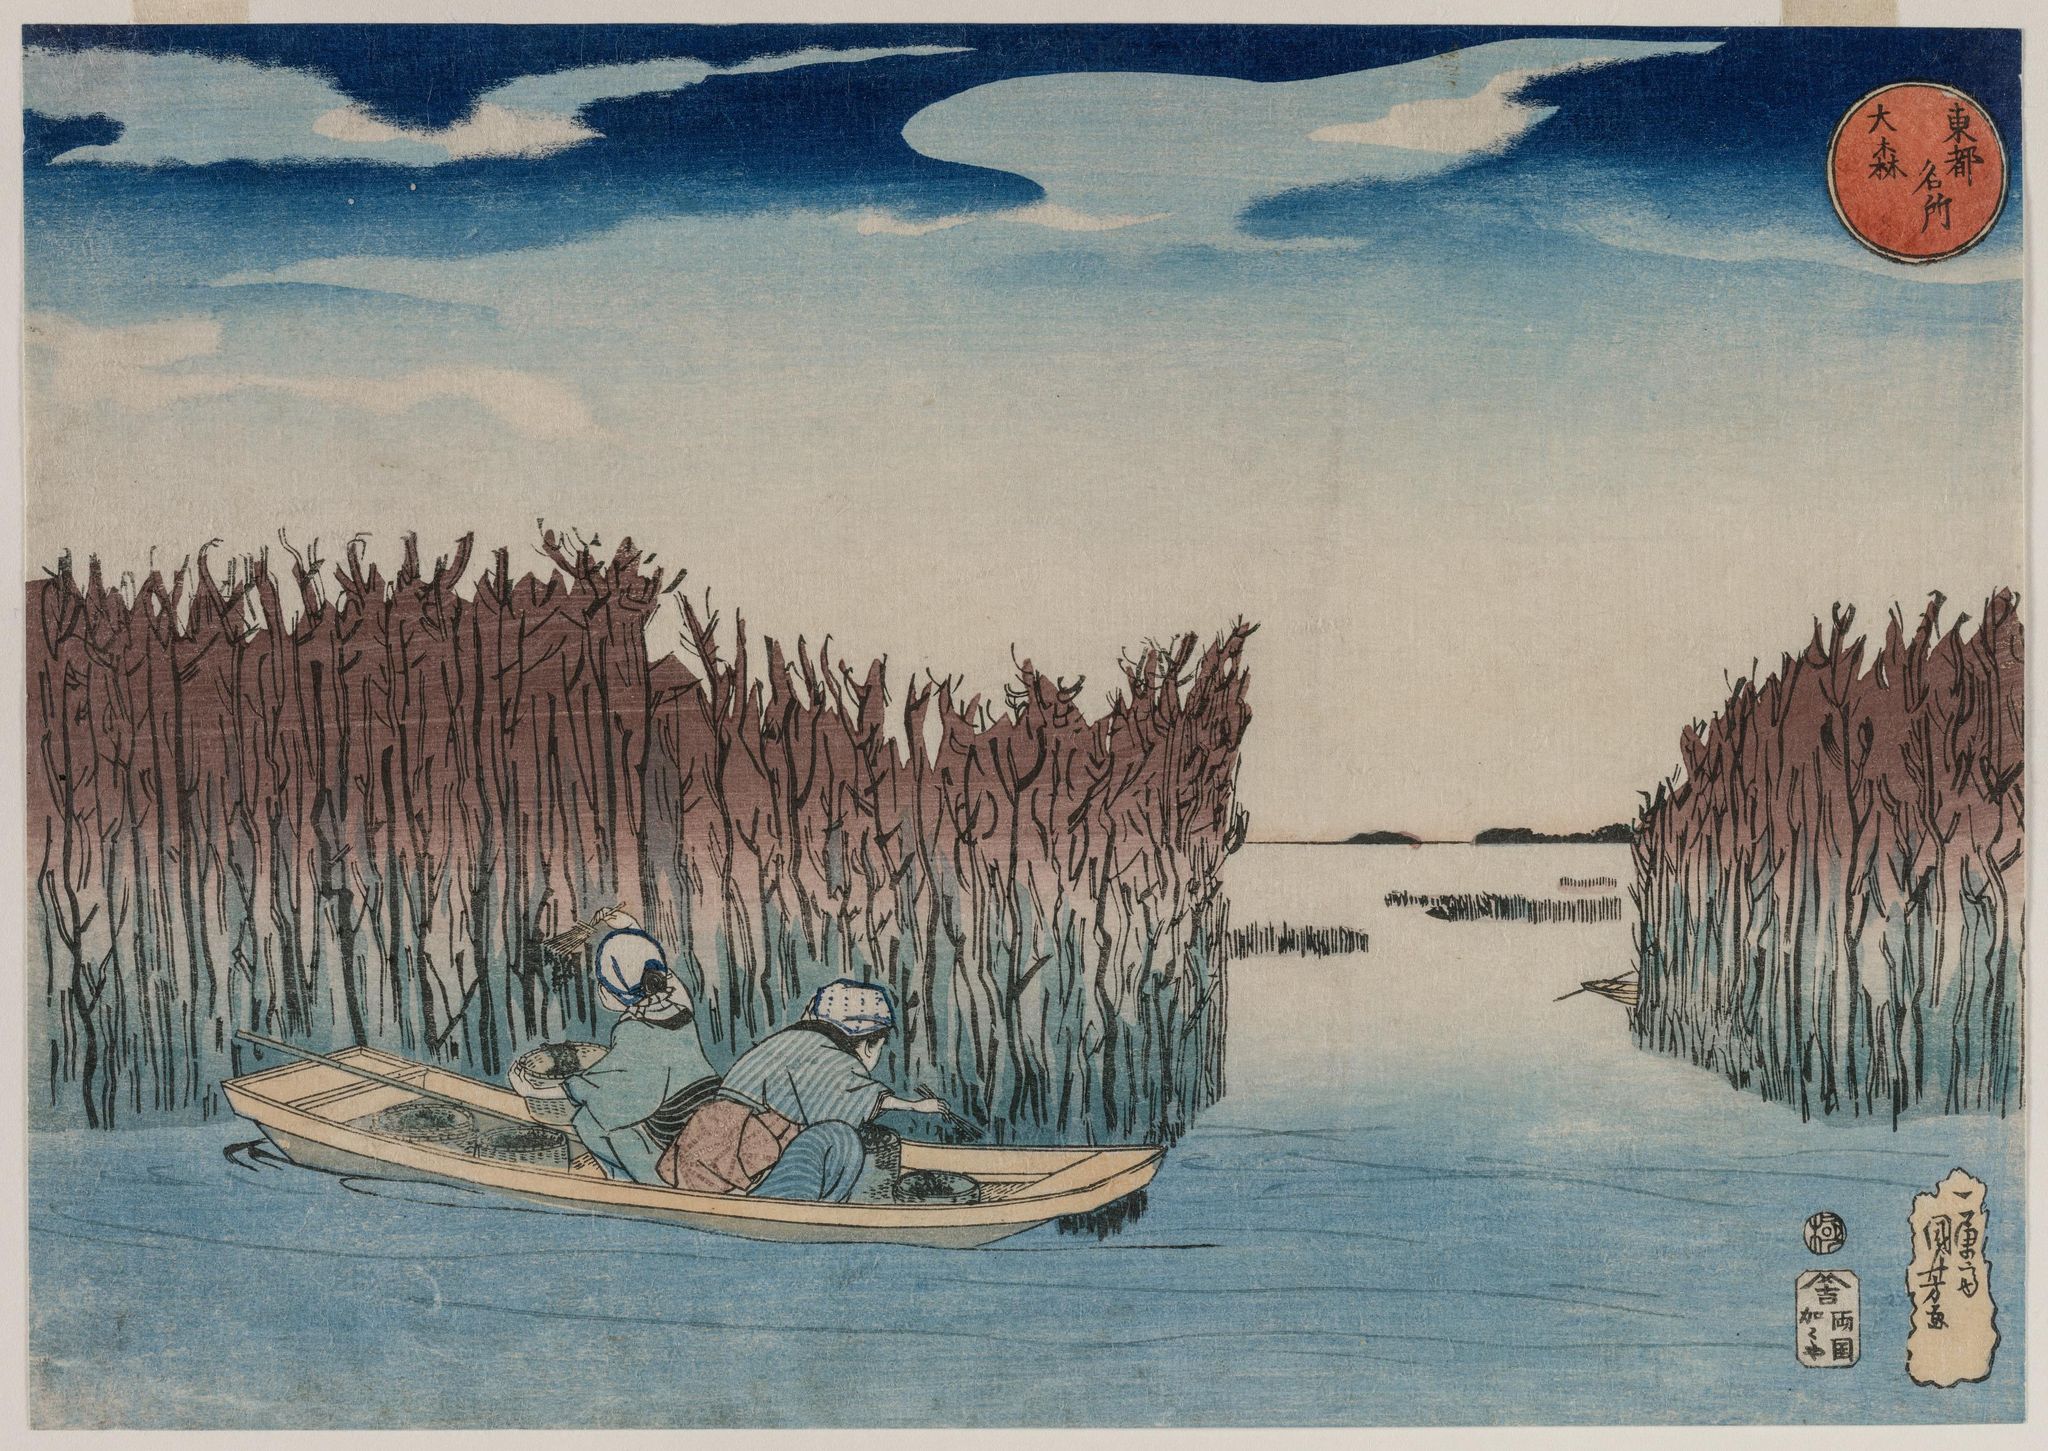 Ōmori, from the series Famous Places in the Eastern Capital